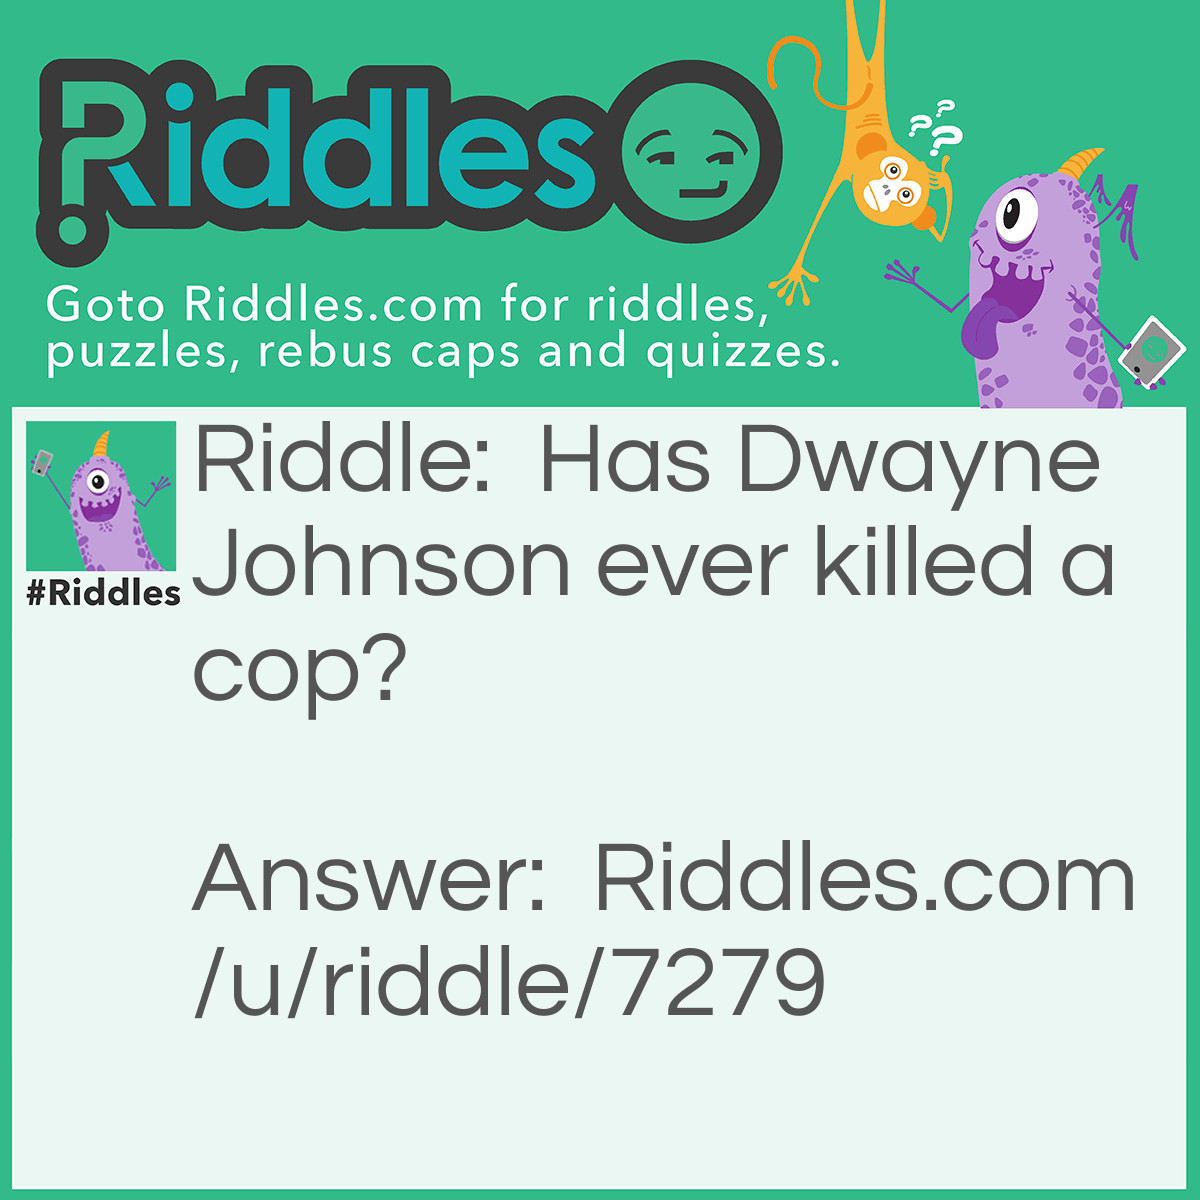 Riddle: Has Dwayne Johnson ever killed a cop? Answer: Yes, in Lord of the Flies. The rock killed Piggy.